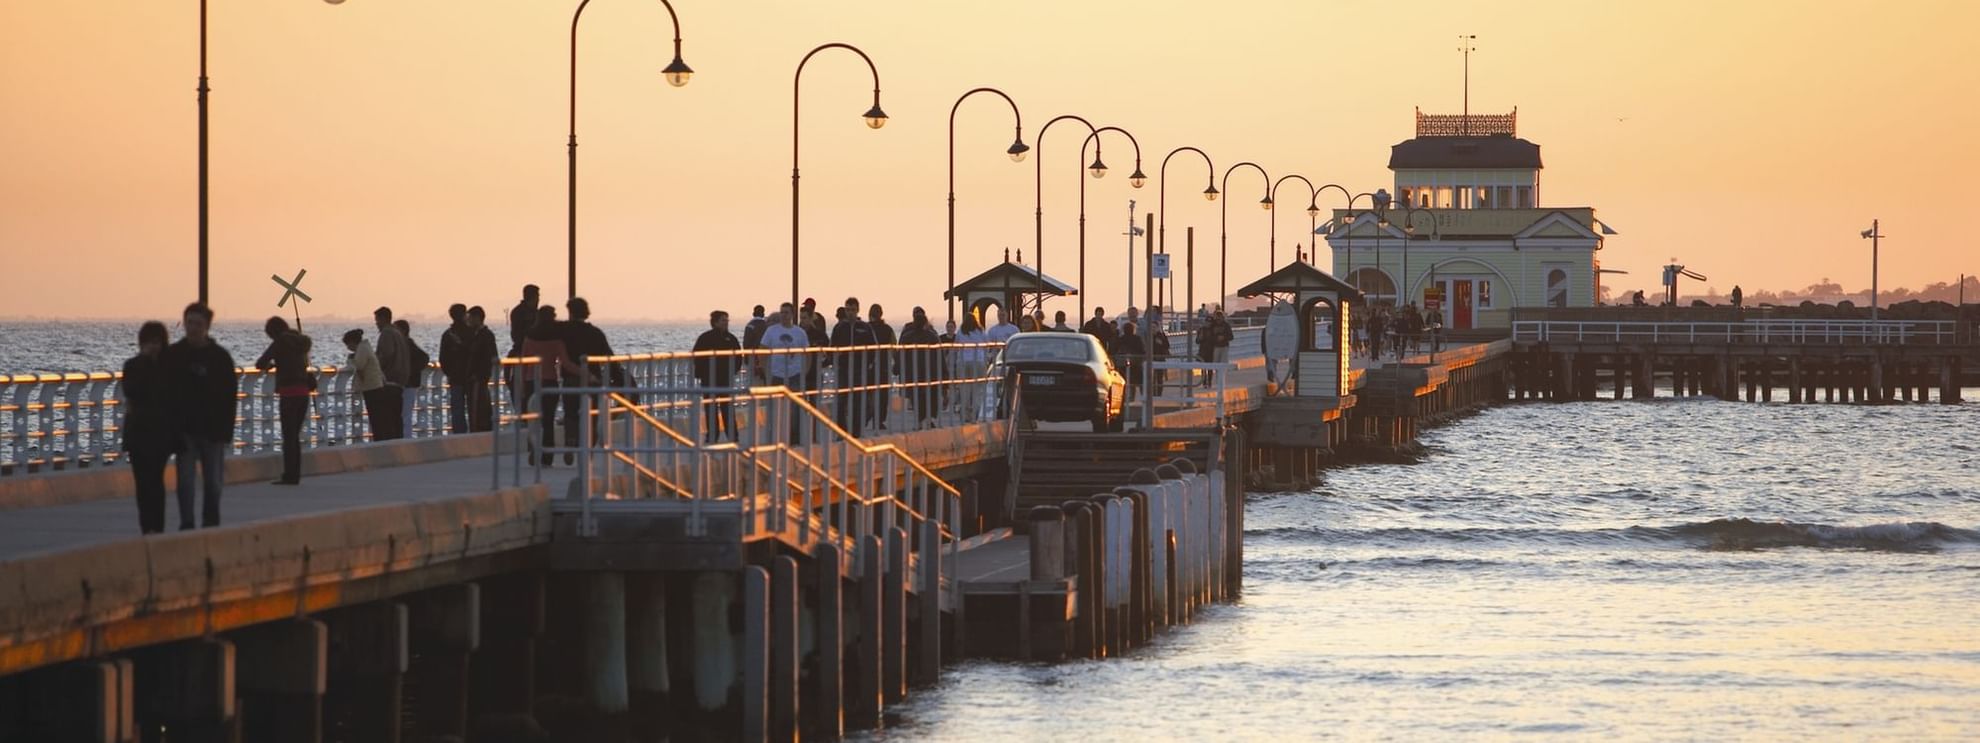 St Kilda Pier and Breakwater during sunset nearby Mercure Welcome hotel